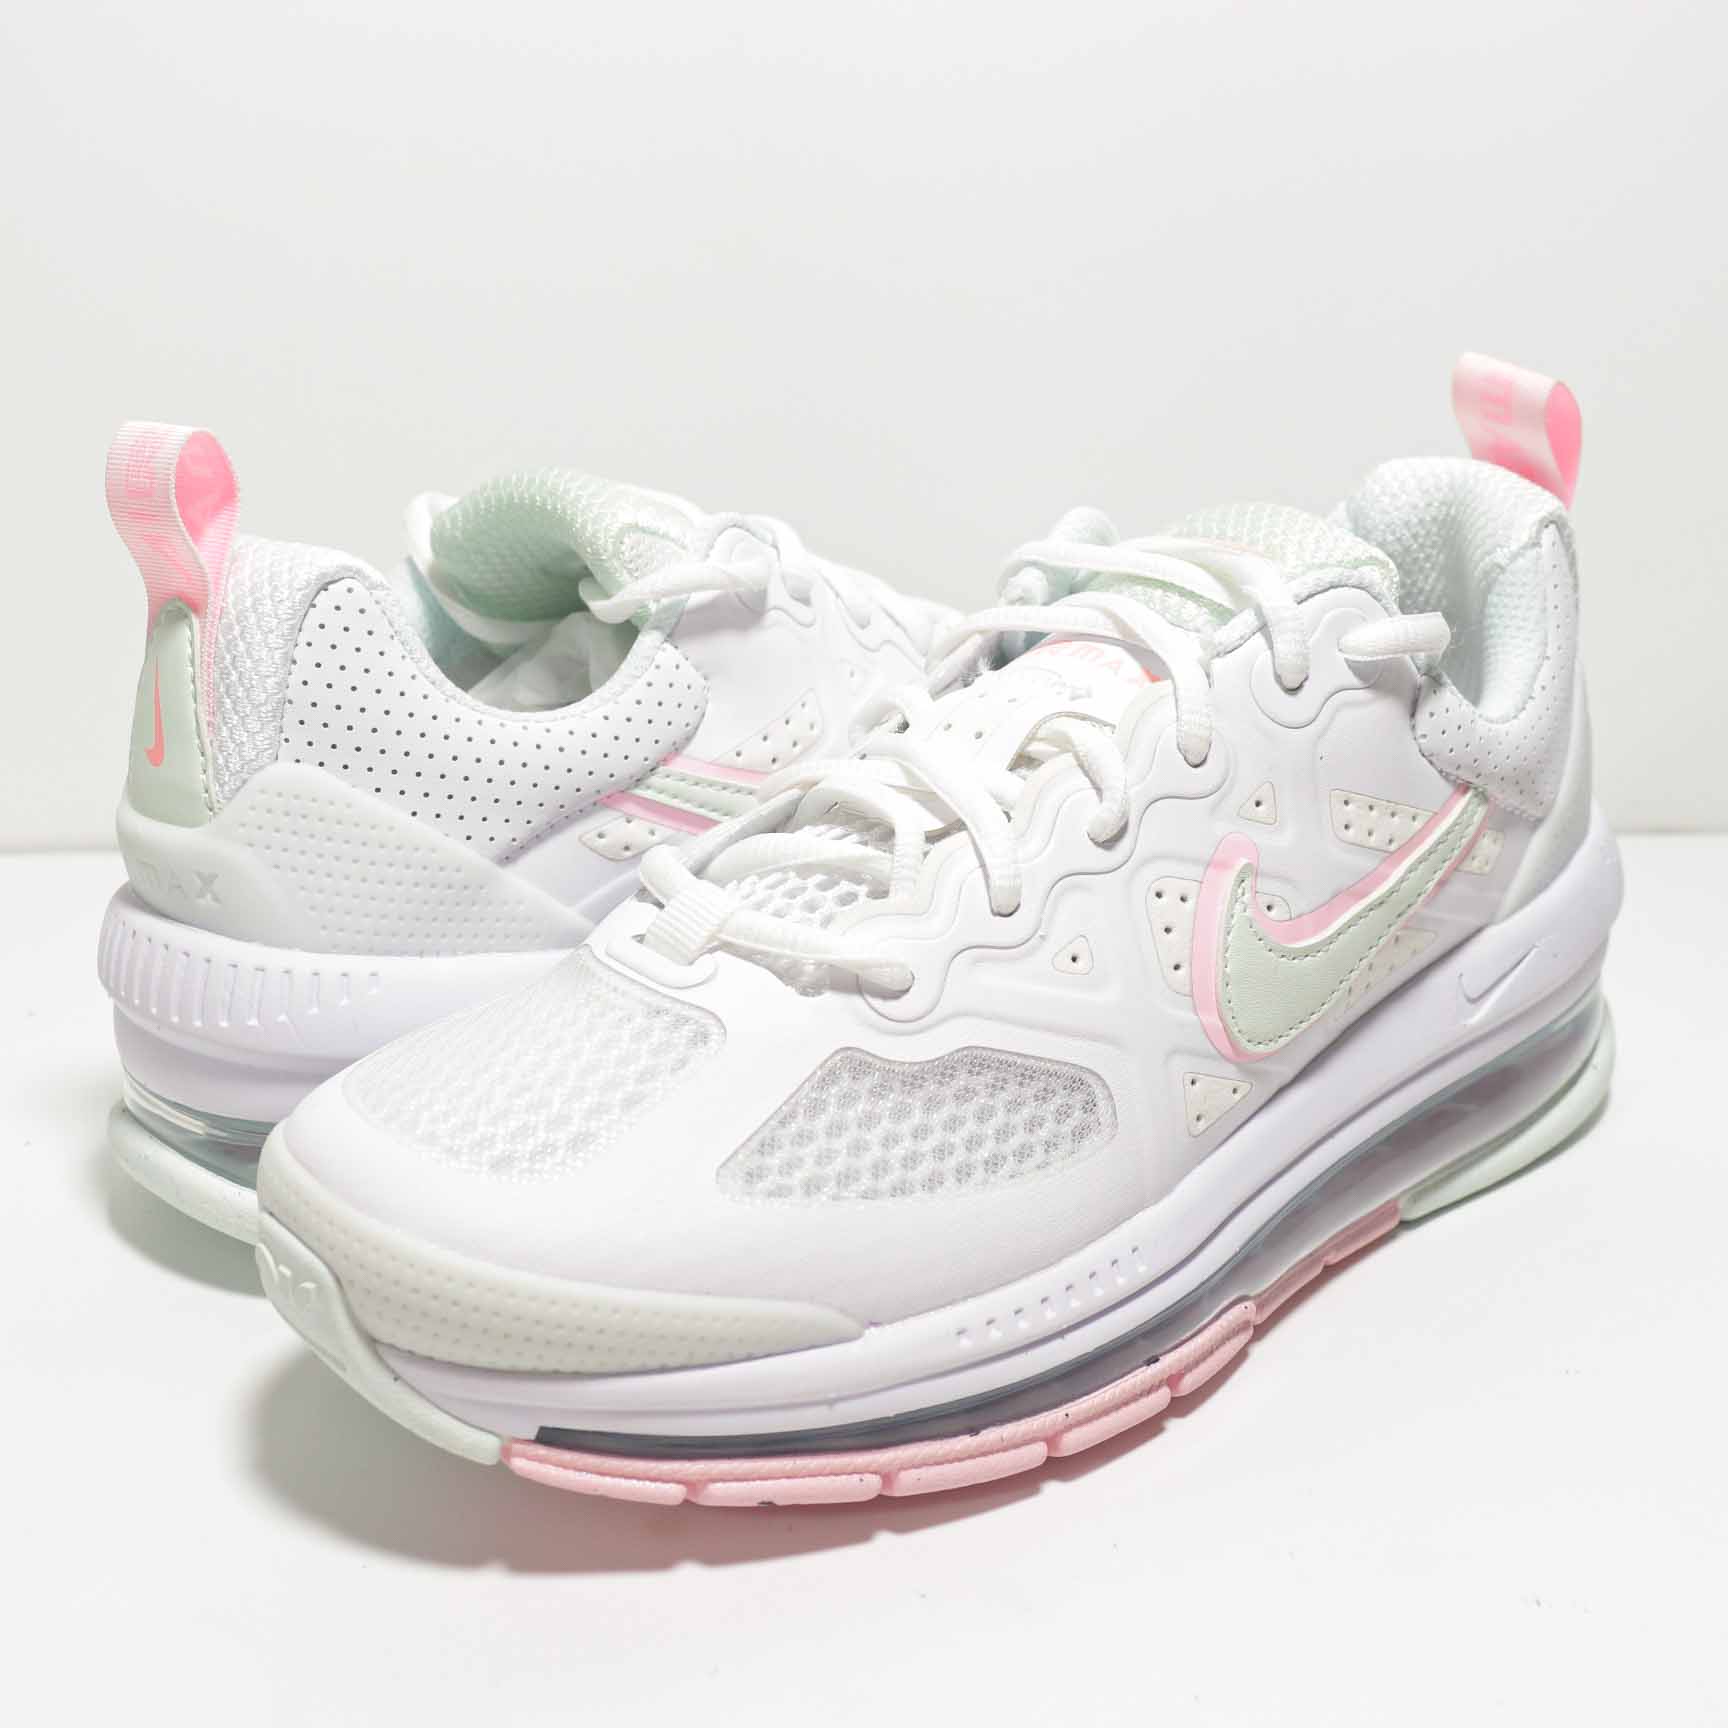 Nike Air Max Genome White Pink Shoes